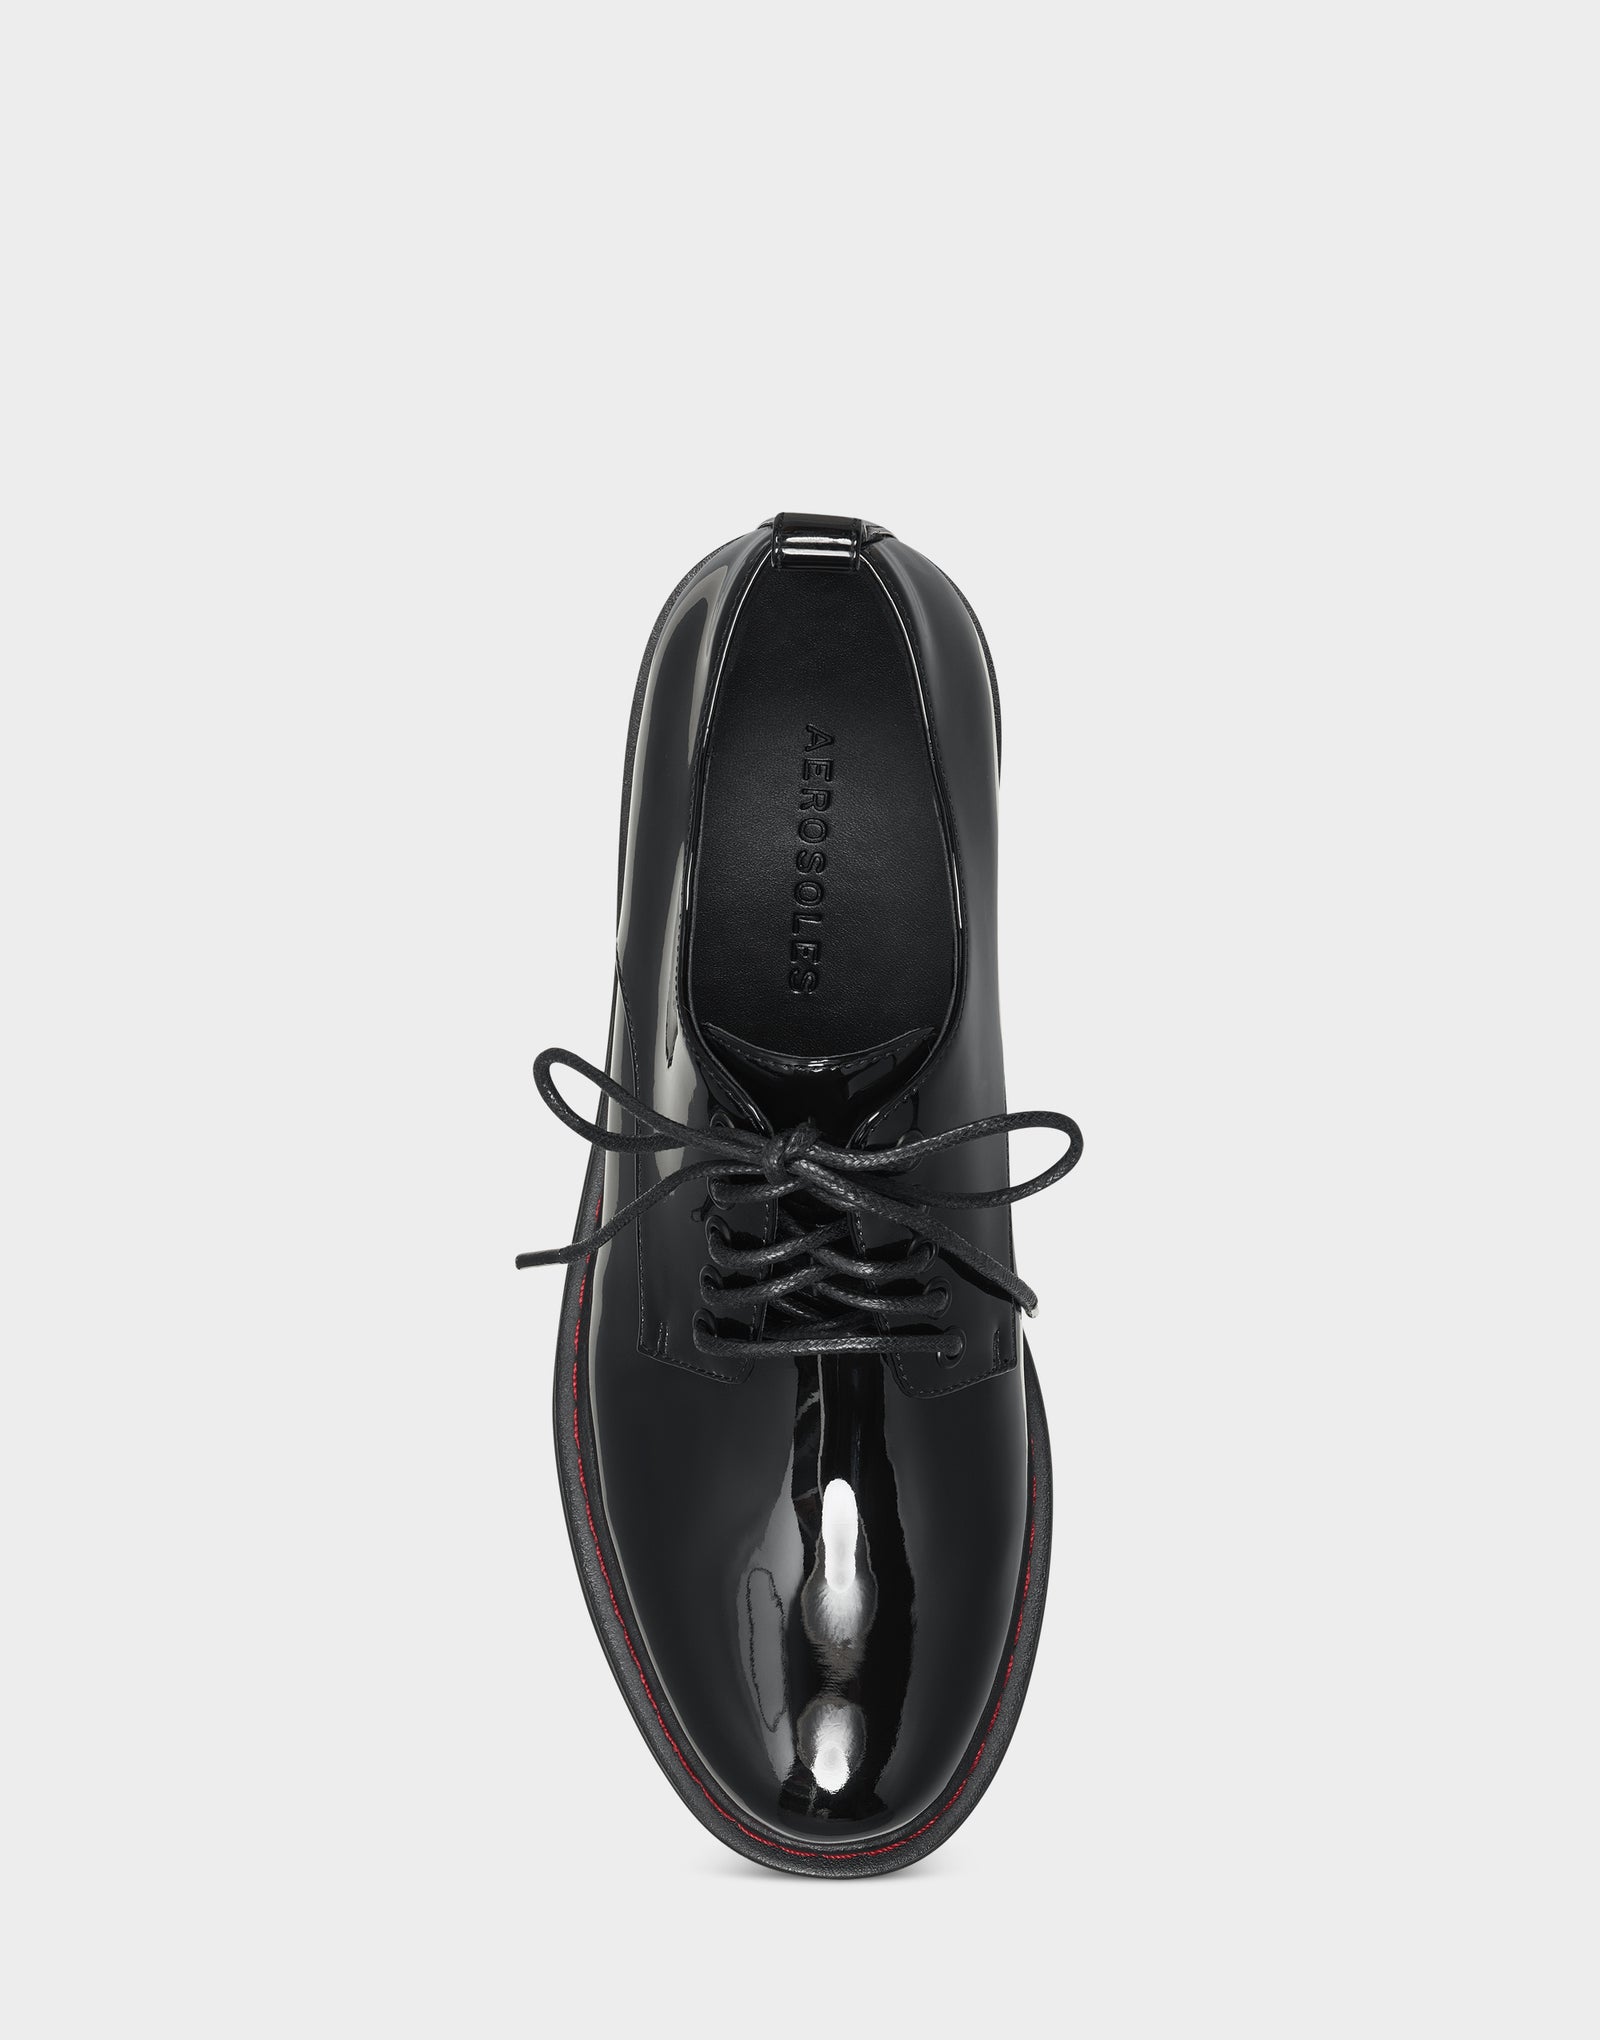 Women's Lace-up Oxford in Black